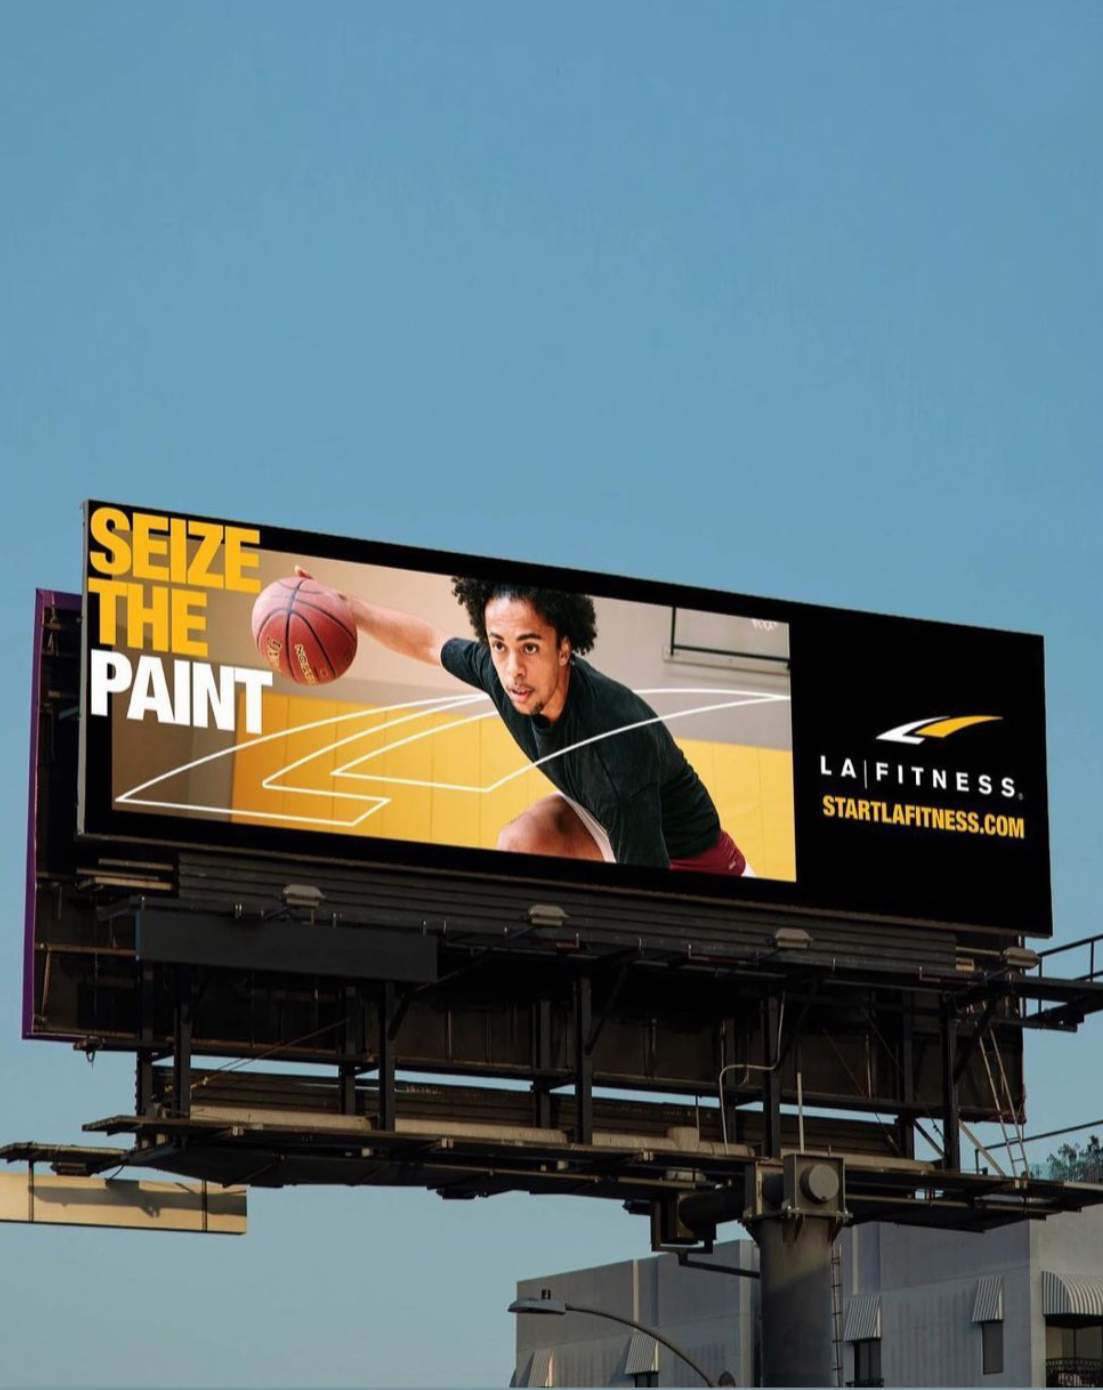 LA Fitness Billboard featuring an image by Caleb Kuhl of an african american man playing basketball in a gym